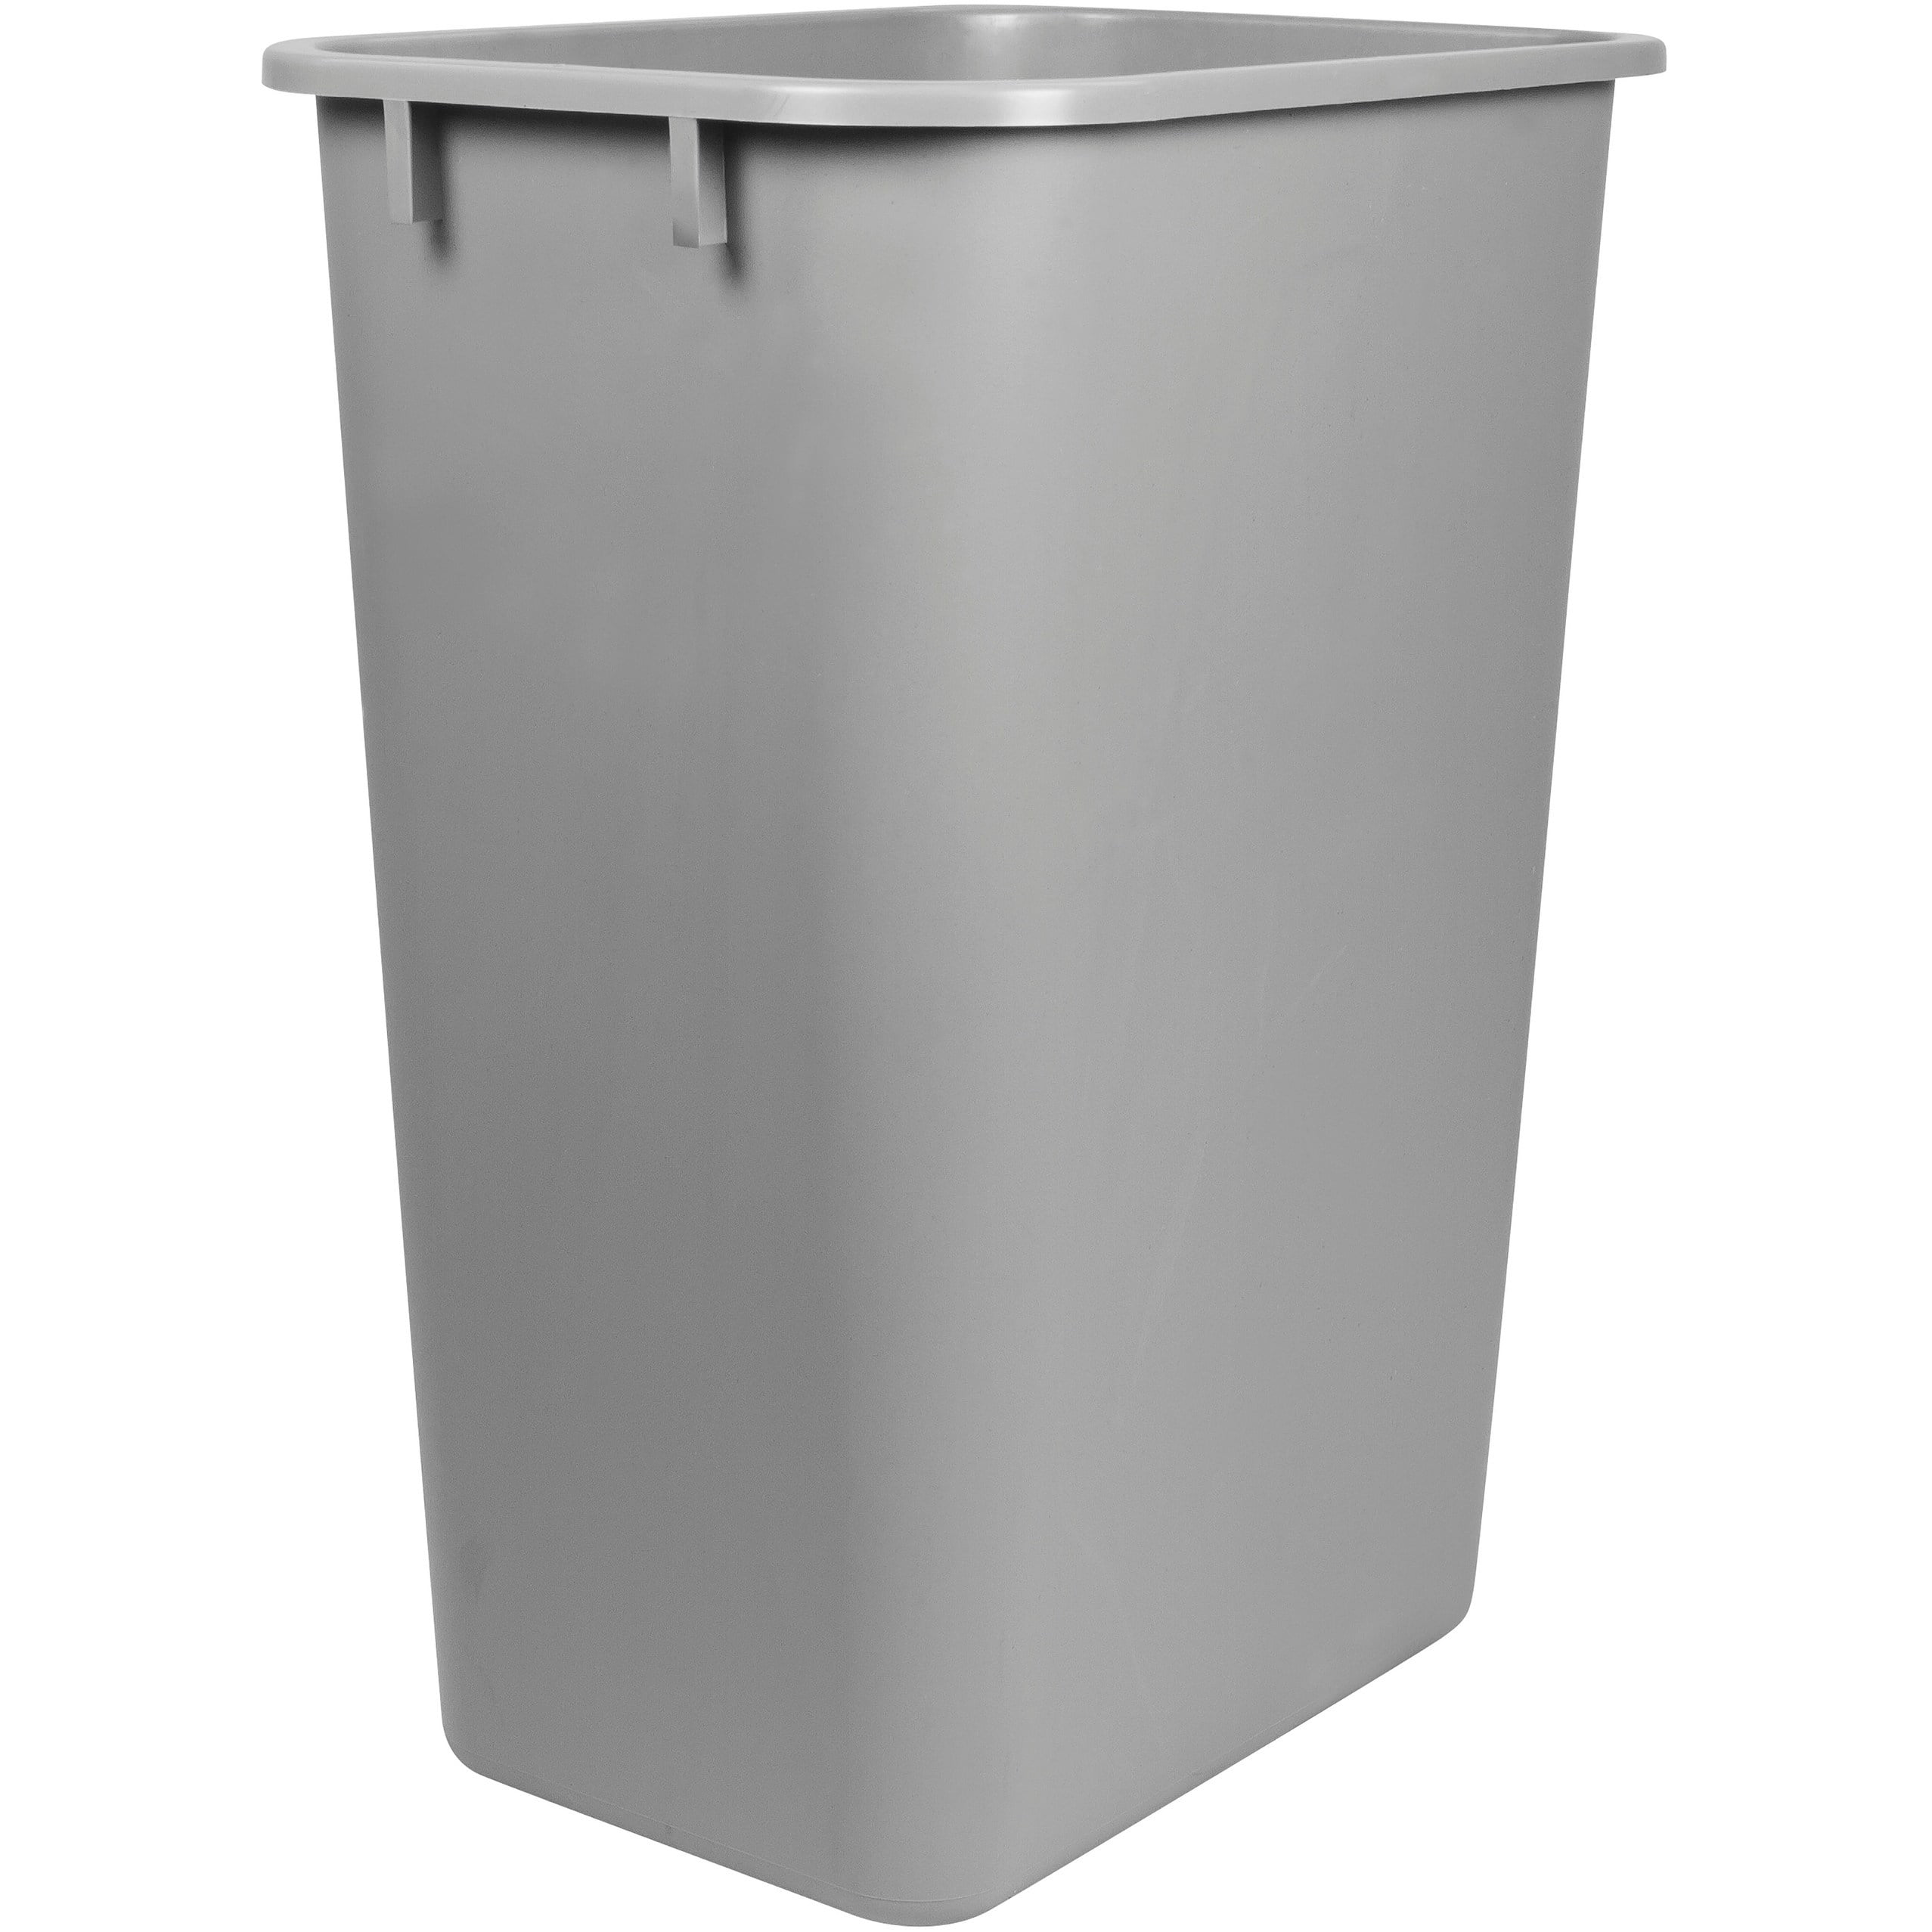 Large/Tall Waste Basket Black 15.5 x 11 x 20.75 Inches Case of 4 